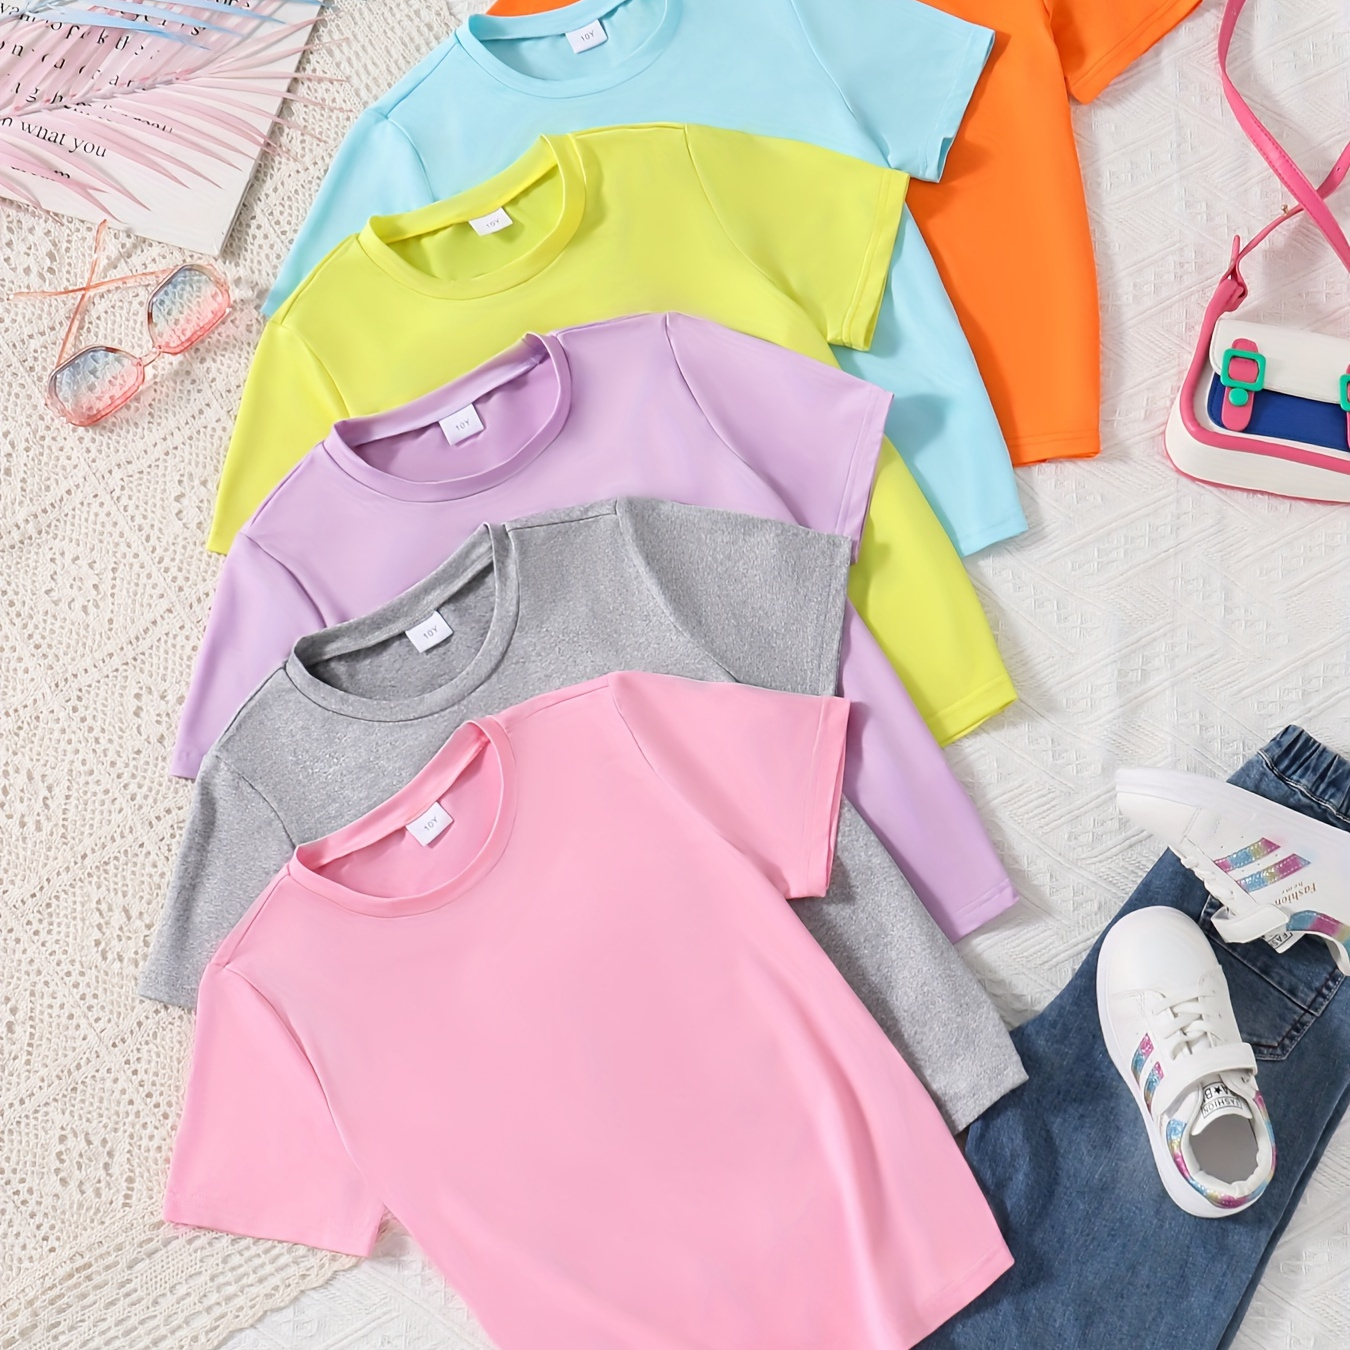 

Girls 6pcs/set Casual & Versatile Solid Colored T-shirts Tops For Spring & Summer, Girls Comfy Tees Clothes For Street Wear